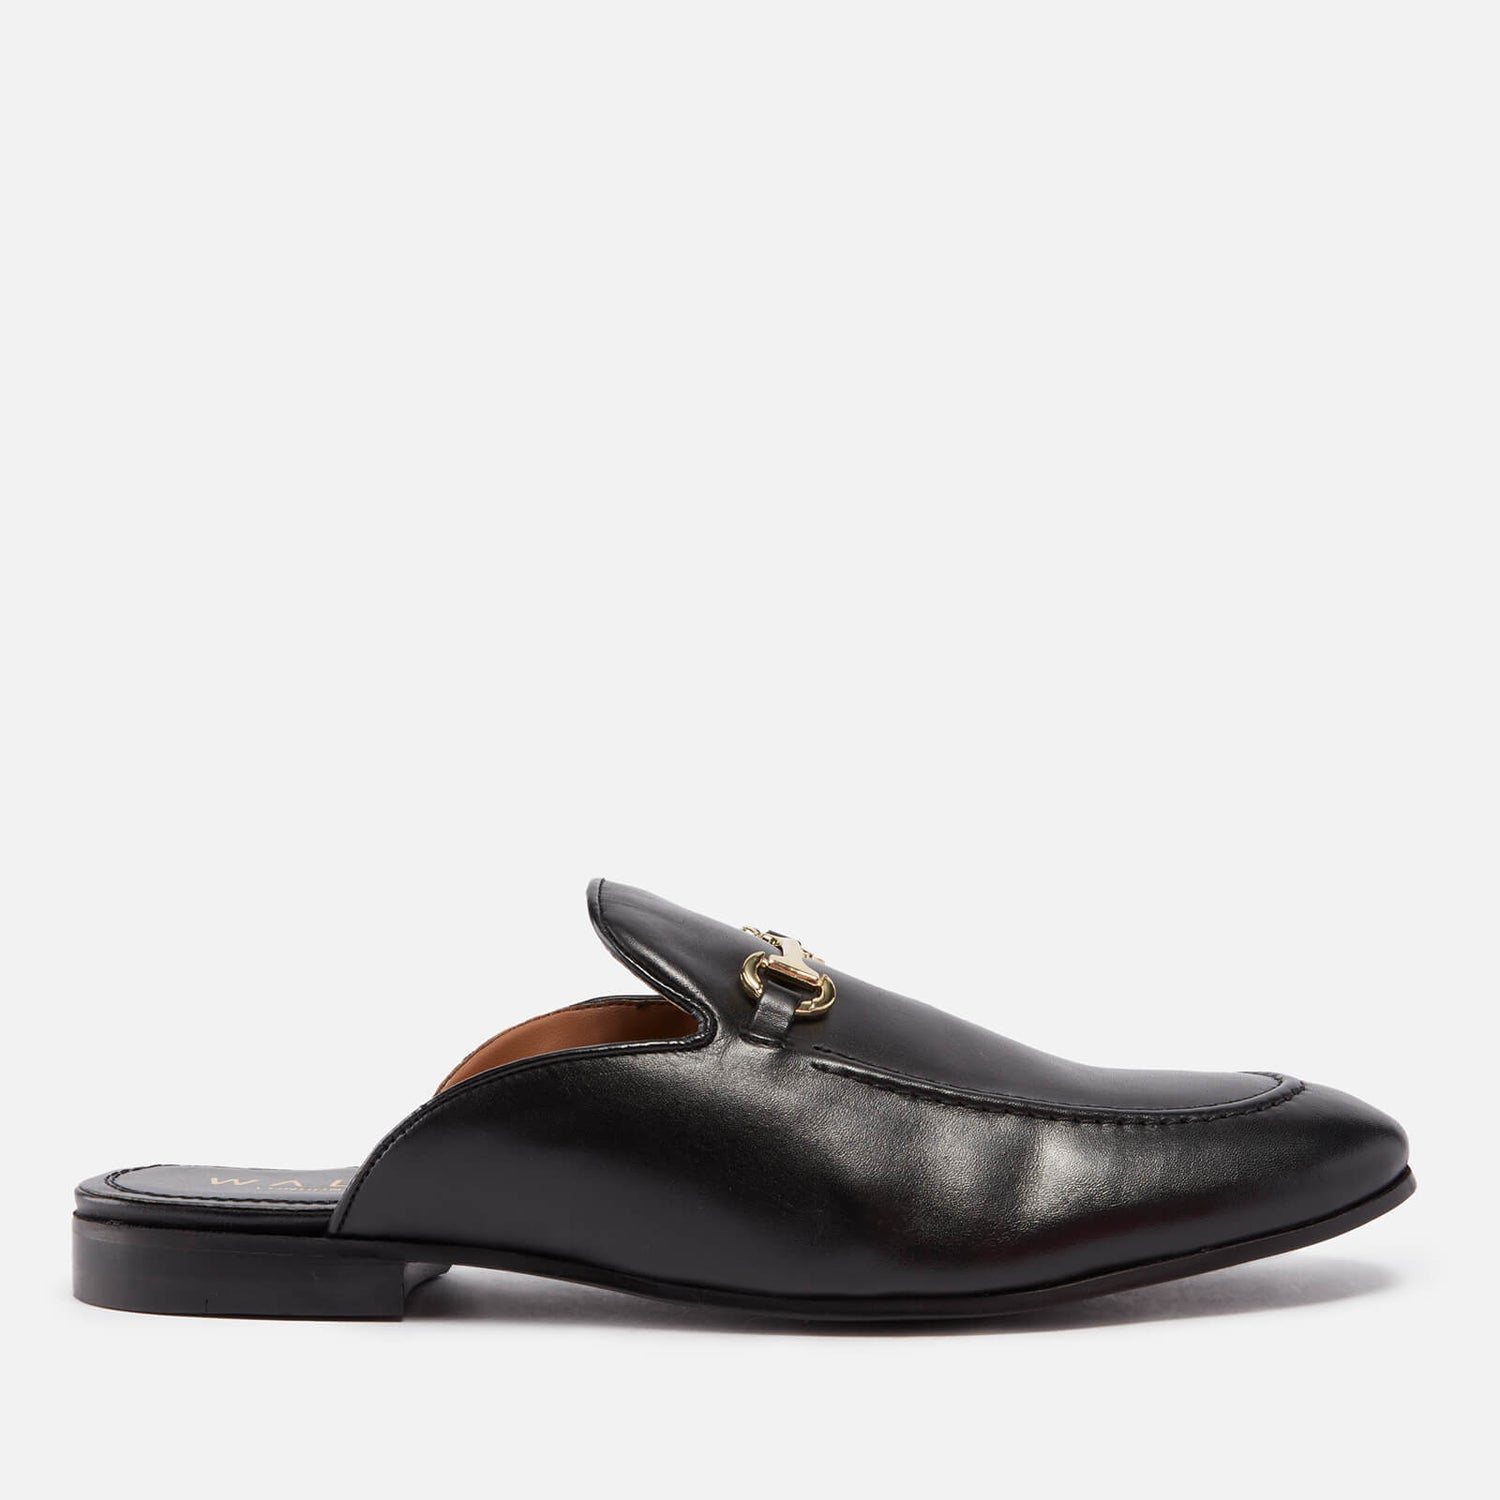 Walk London Terry Leather Mules